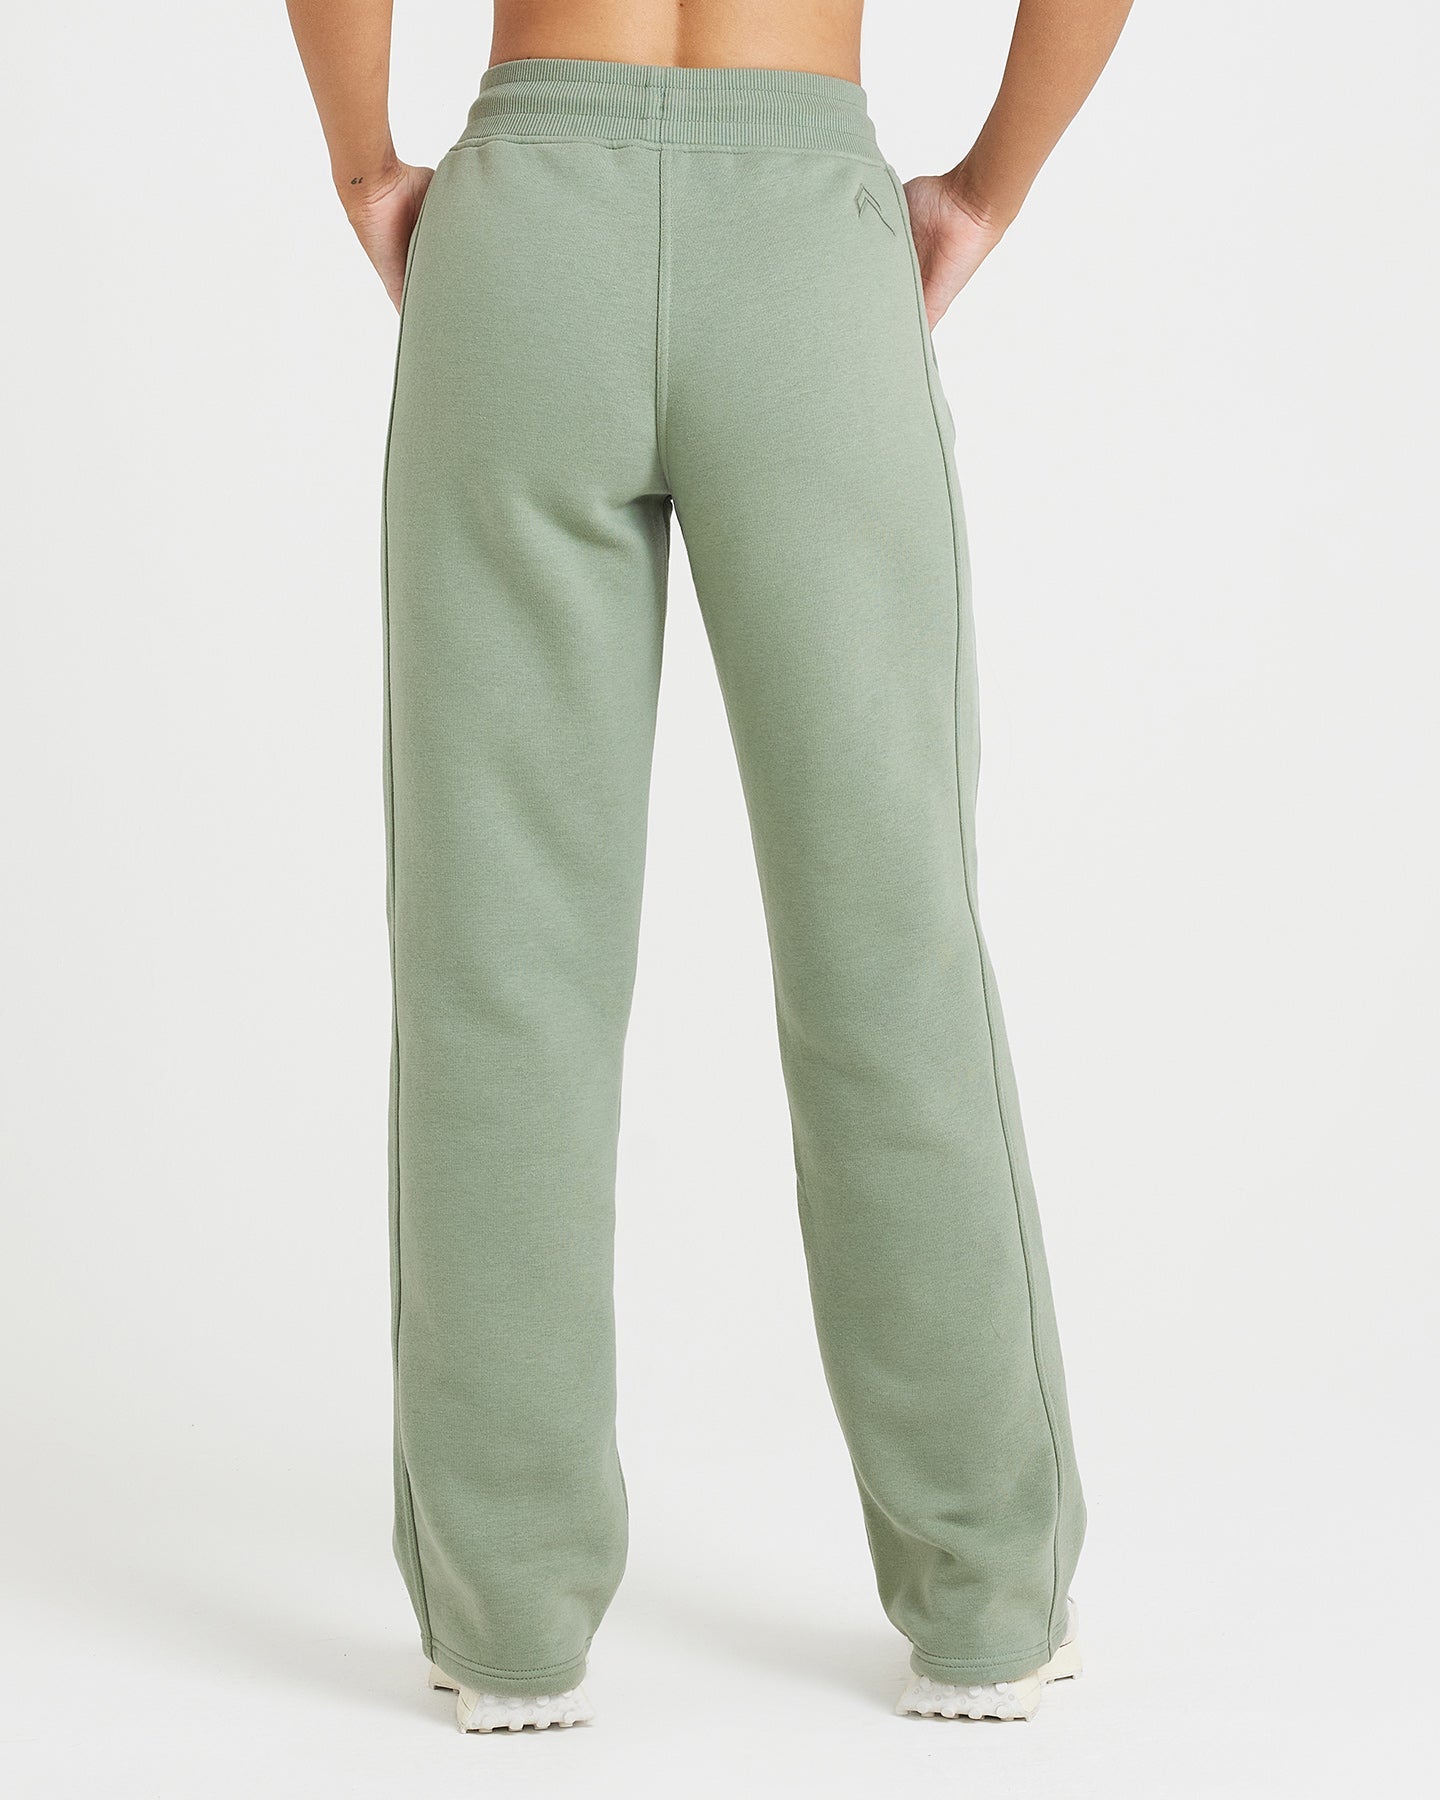 Hills &Clouds; Classic Light Weight Joggers (Olive Green) - Hills